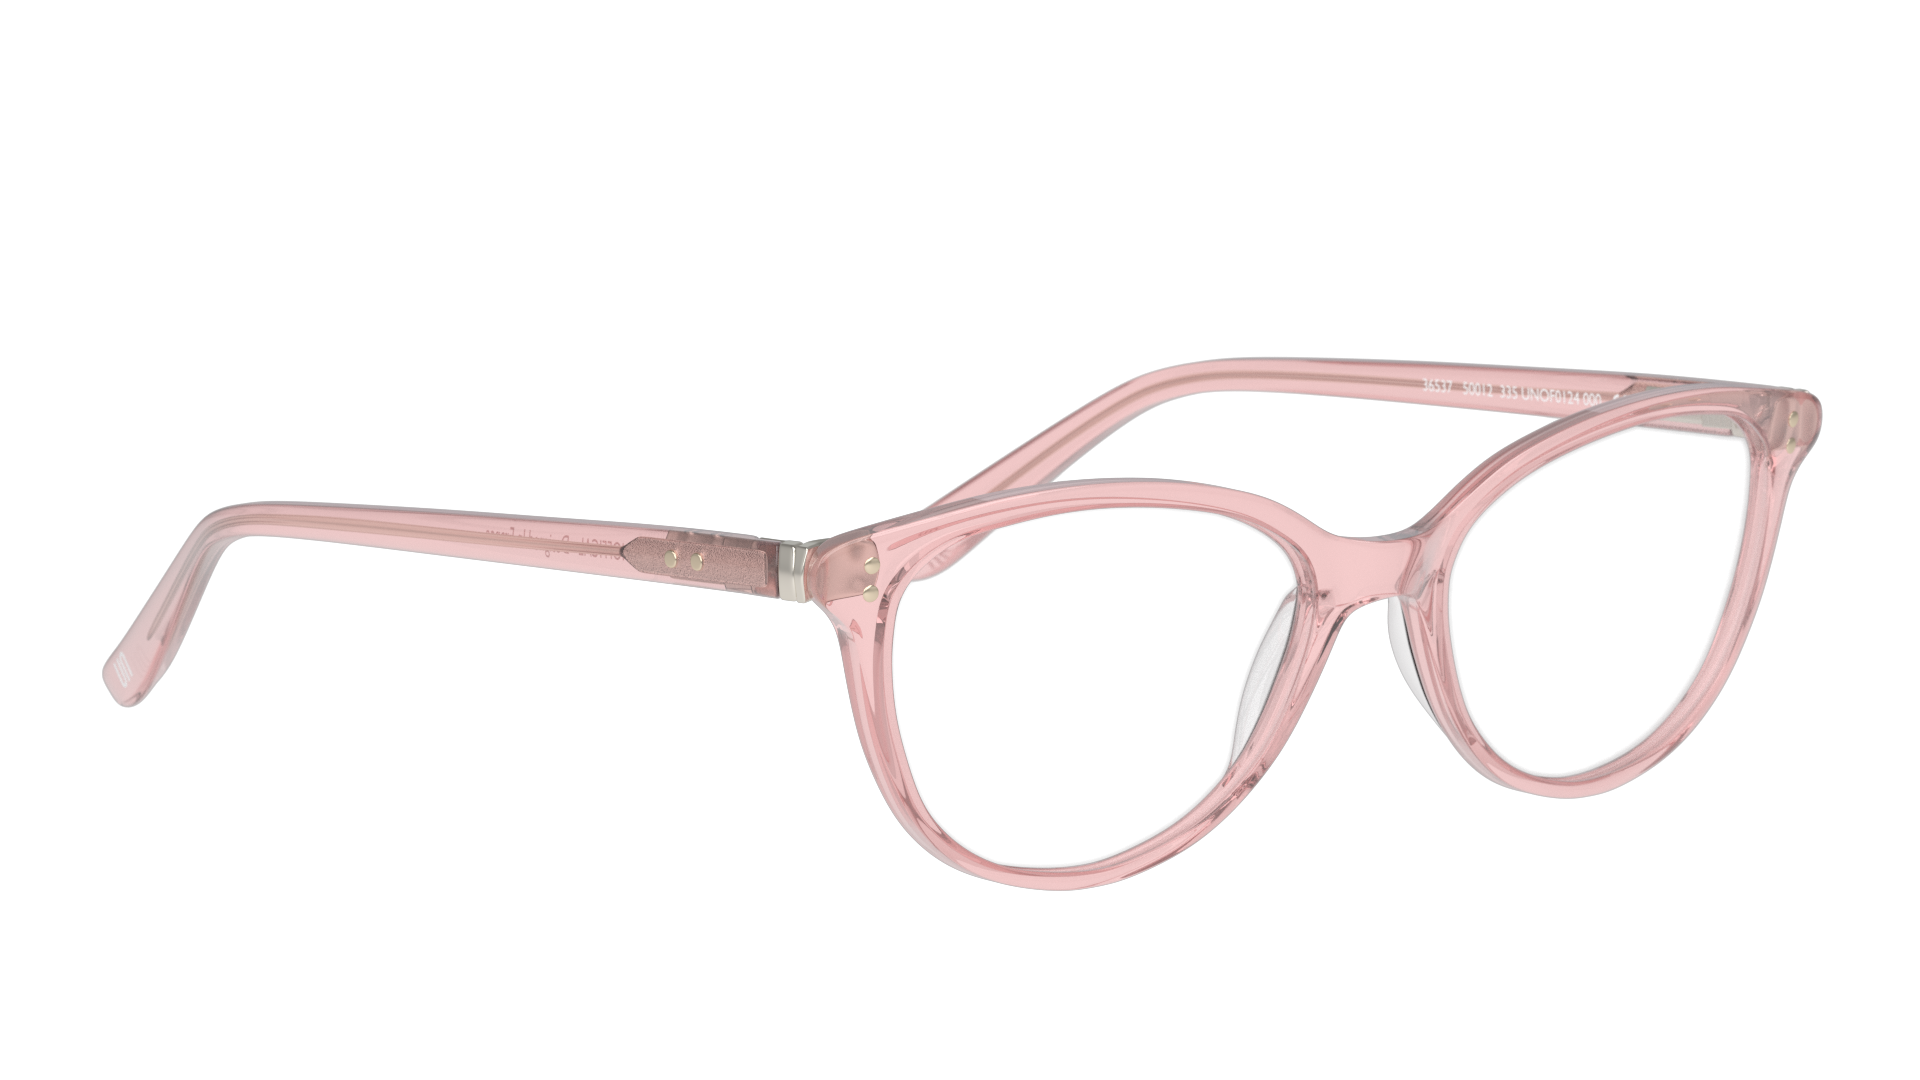 Angle_Right01 Unofficial UNOF0123 Glasses Transparent / Pink